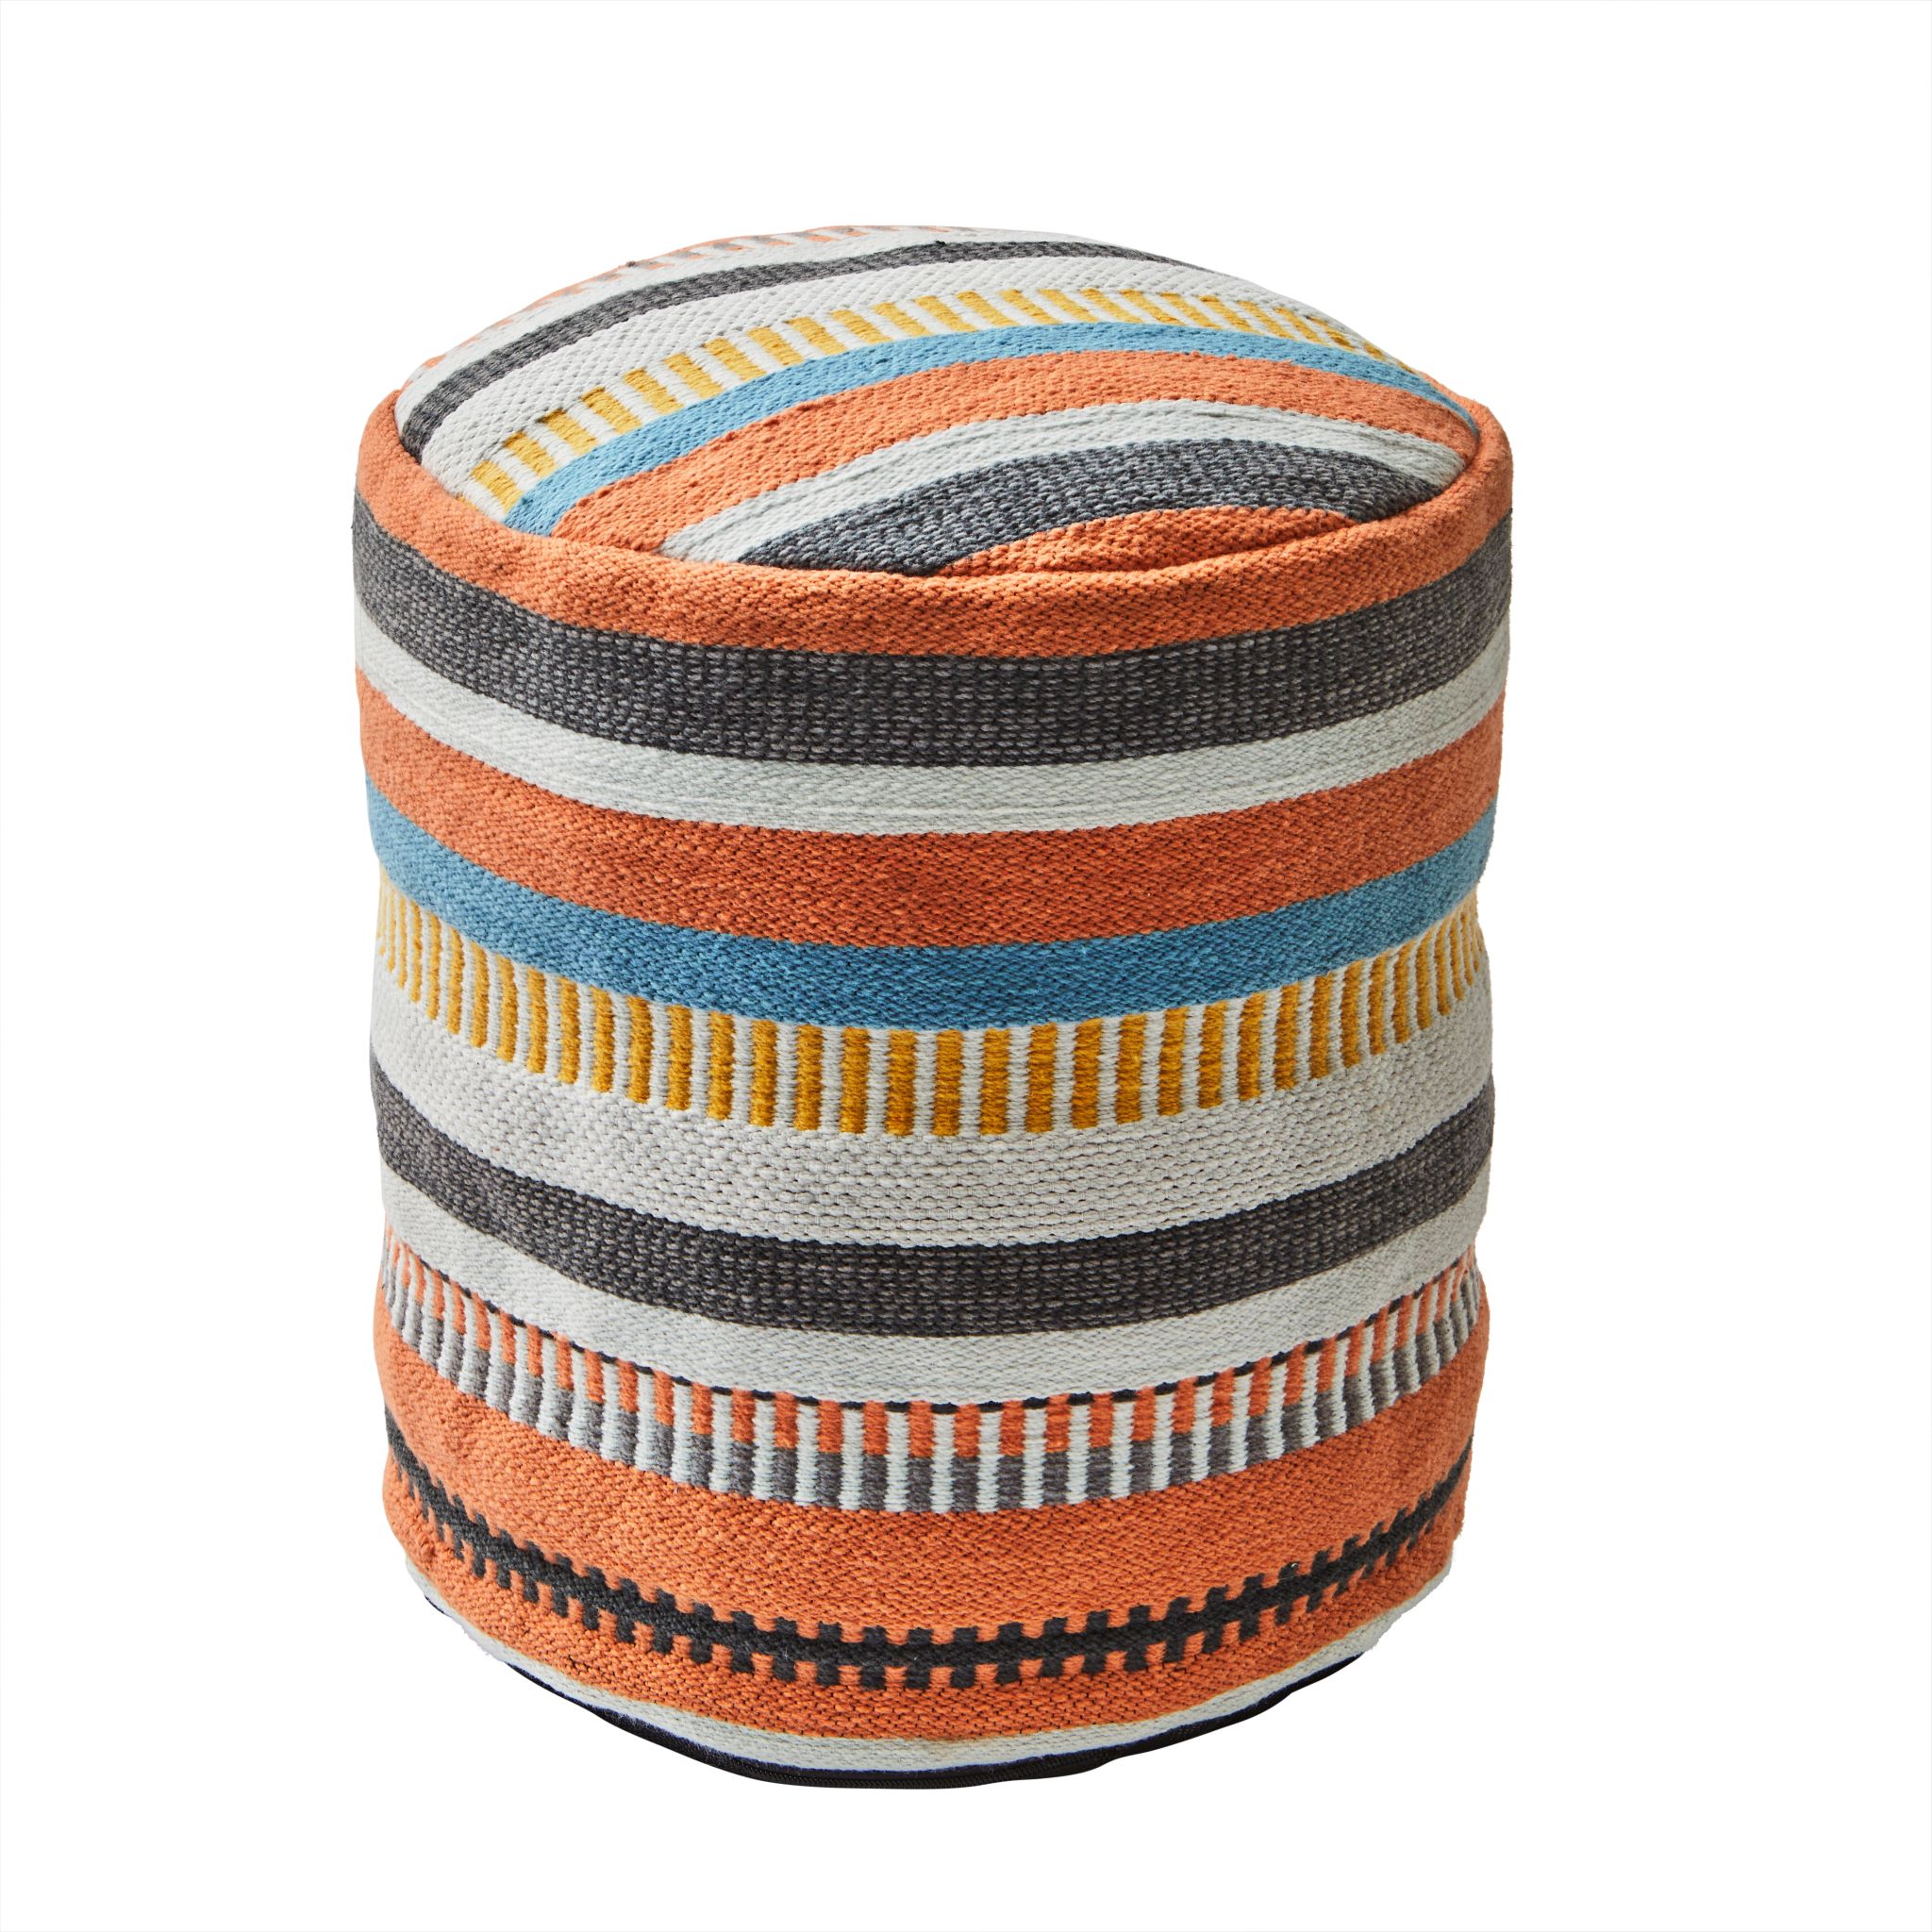 Better Homes & Gardens Multi Stripe Round Outdoor Pouf, 16" x 16" x 16", Multi-Color - image 1 of 5